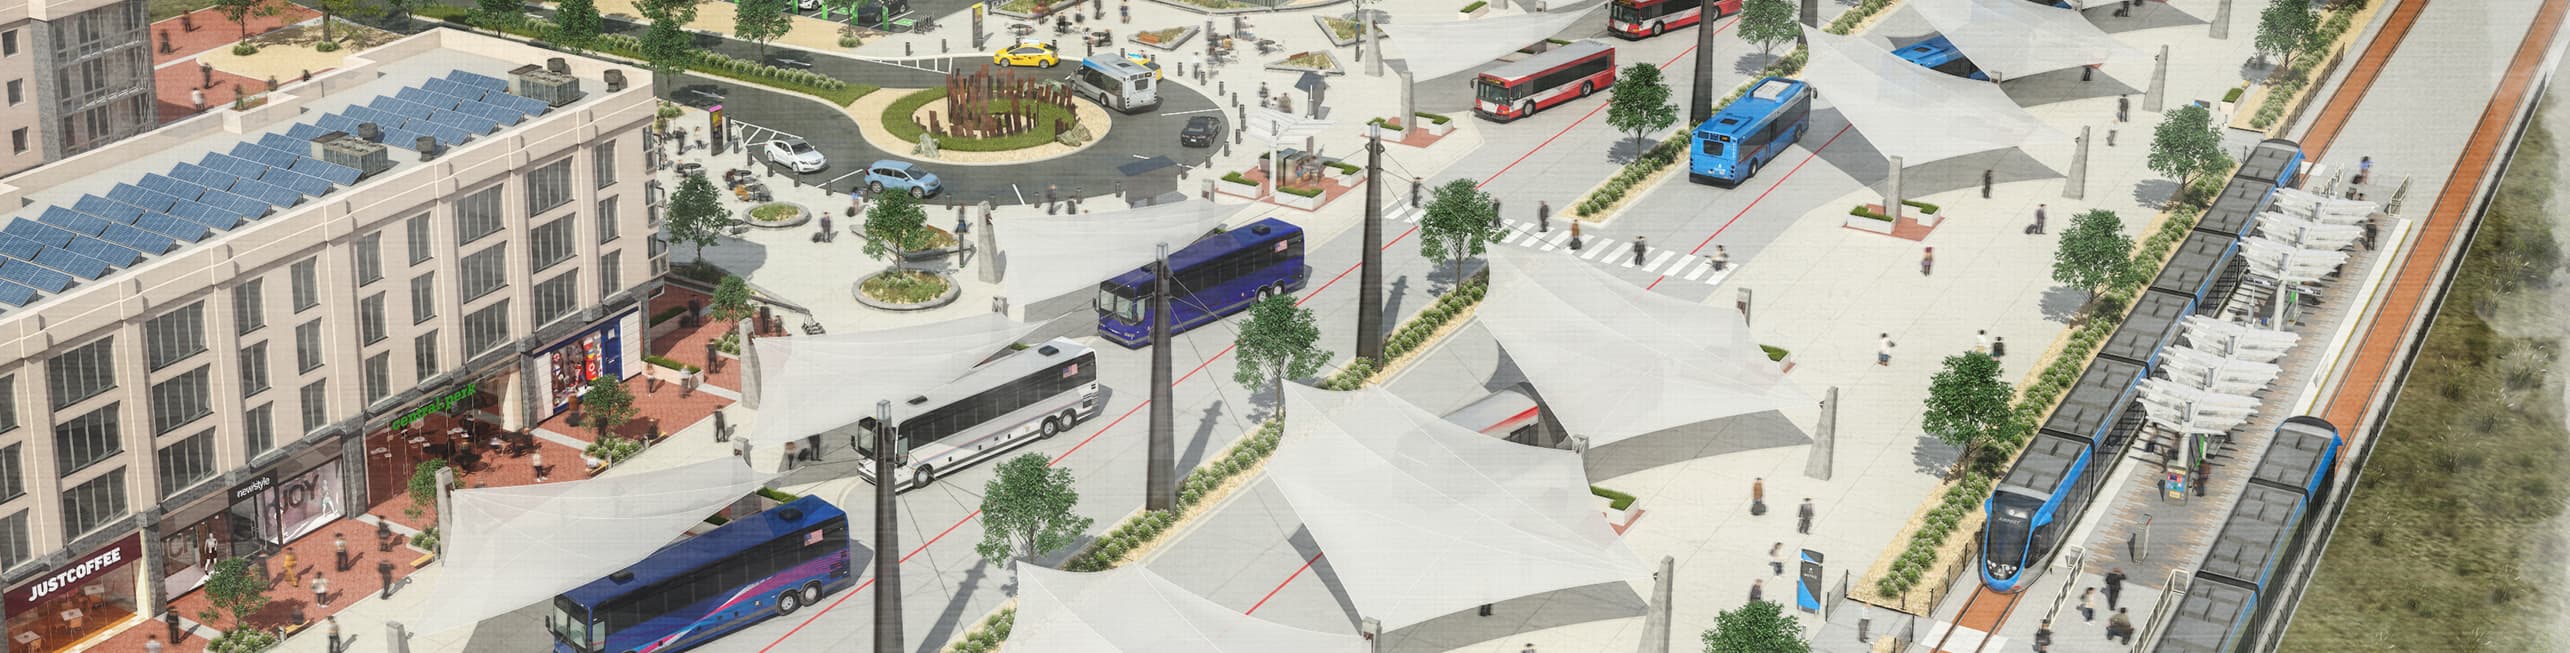 Artist's rendering of multiple public transit modes for Project Connect  - including Park and rides